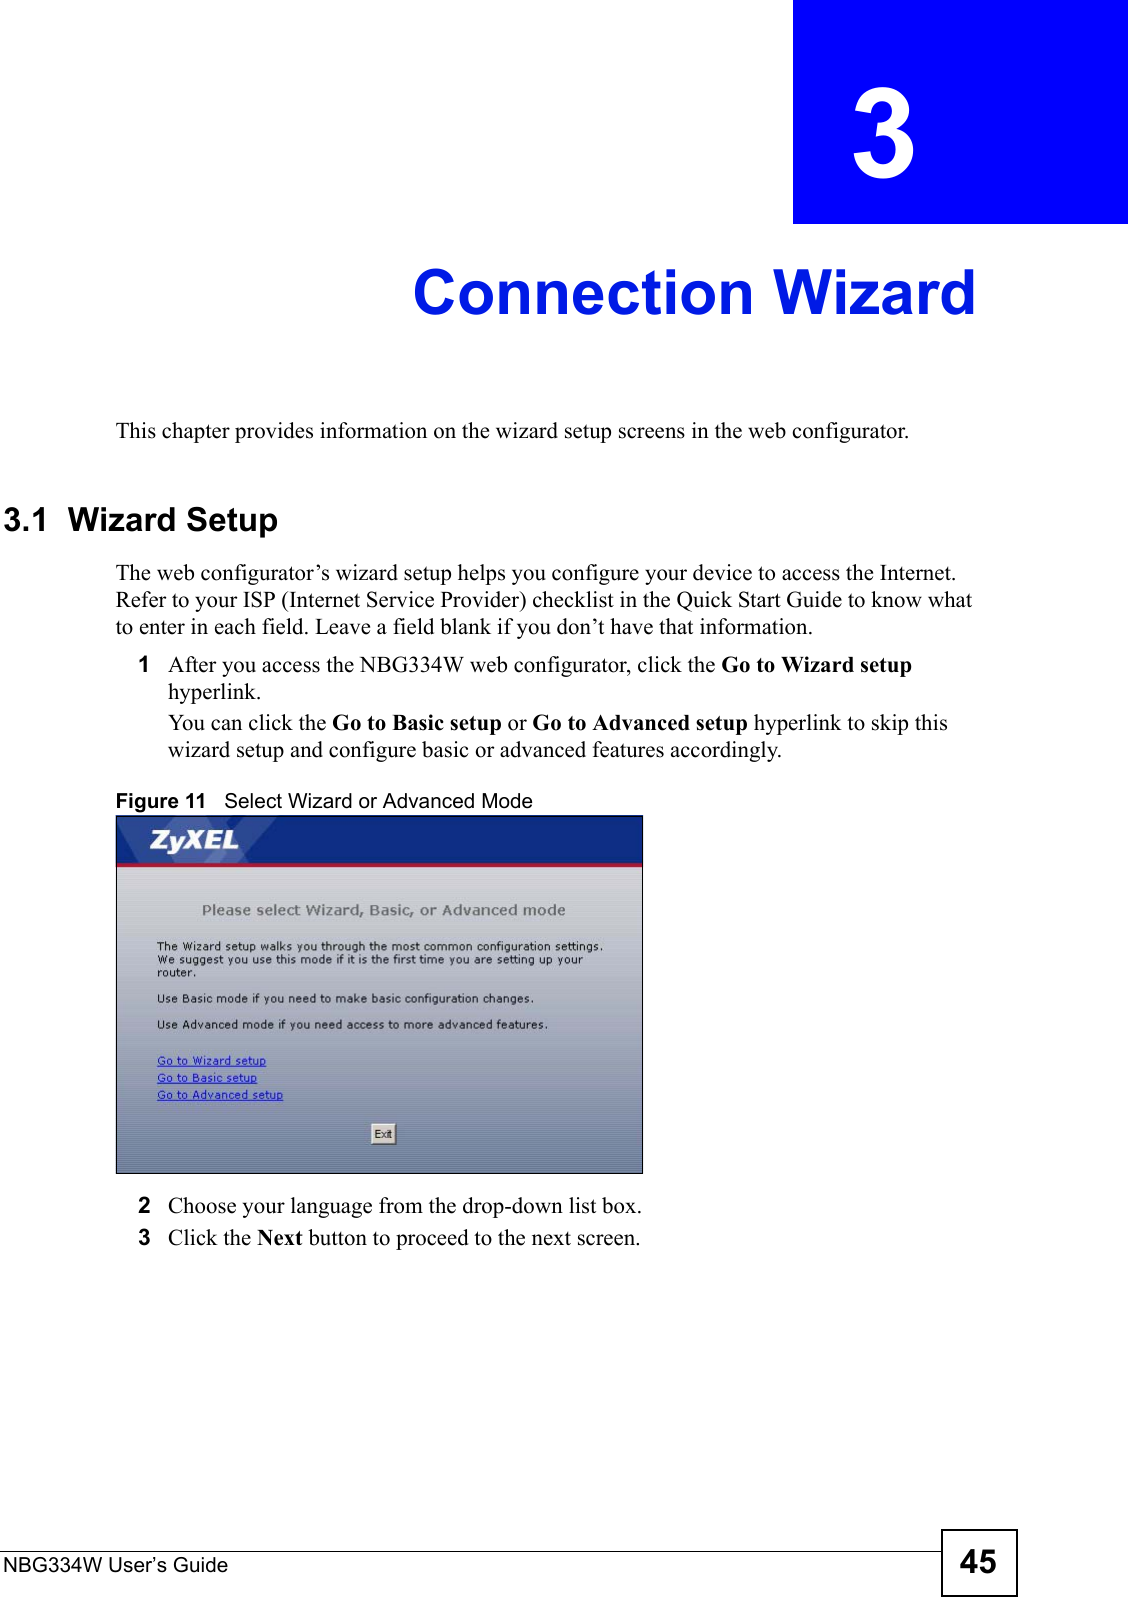 NBG334W User’s Guide 45CHAPTER  3 Connection WizardThis chapter provides information on the wizard setup screens in the web configurator.3.1  Wizard SetupThe web configurator’s wizard setup helps you configure your device to access the Internet. Refer to your ISP (Internet Service Provider) checklist in the Quick Start Guide to know what to enter in each field. Leave a field blank if you don’t have that information.1After you access the NBG334W web configurator, click the Go to Wizard setup hyperlink.You can click the Go to Basic setup or Go to Advanced setup hyperlink to skip this wizard setup and configure basic or advanced features accordingly.Figure 11   Select Wizard or Advanced Mode2Choose your language from the drop-down list box.3Click the Next button to proceed to the next screen.